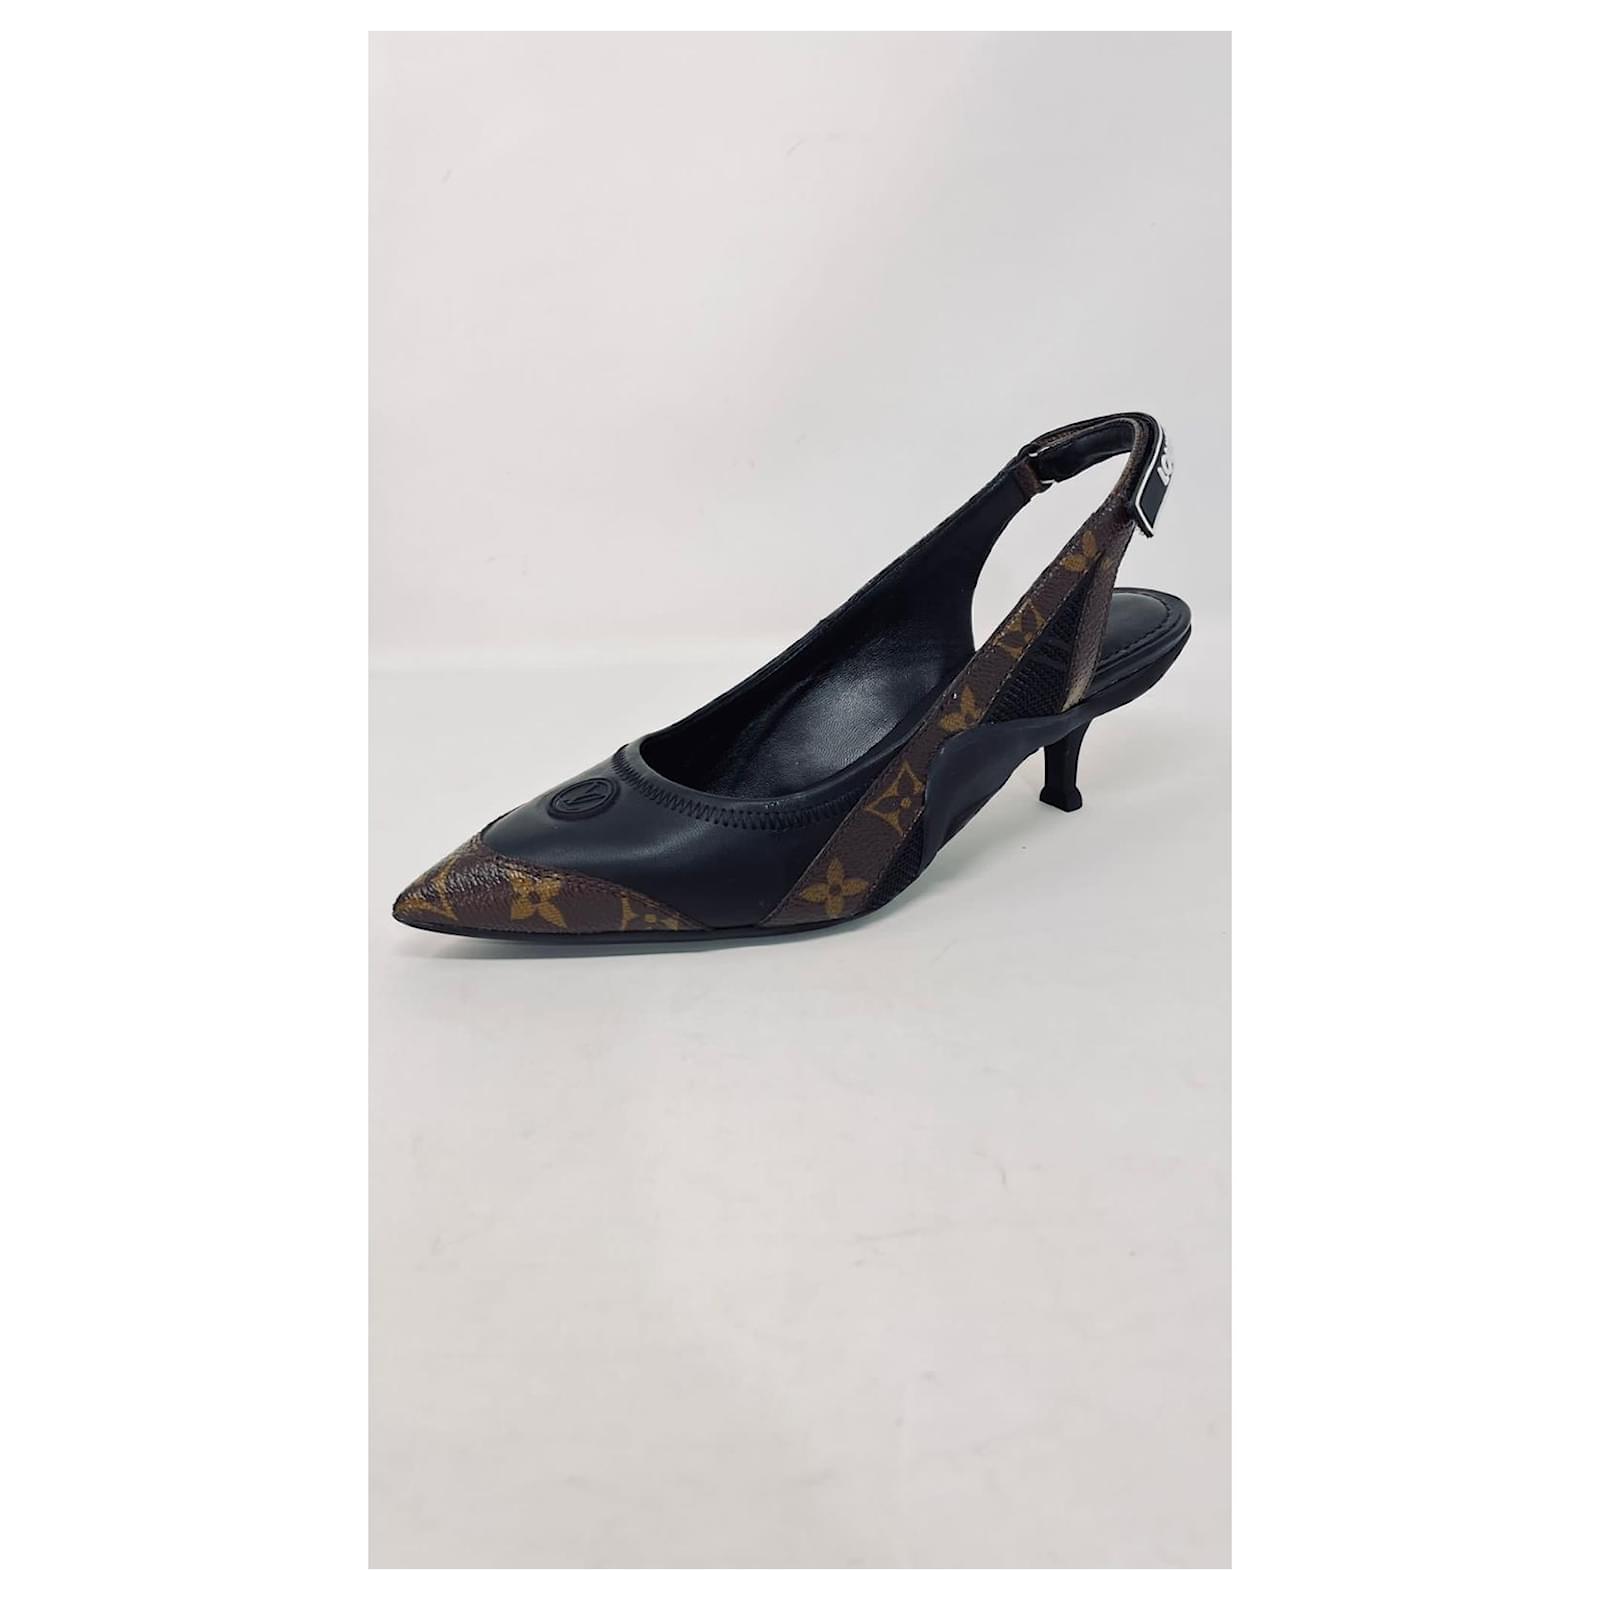 Fit Casually - Louis Vuitton archlight slingback pump 55mm